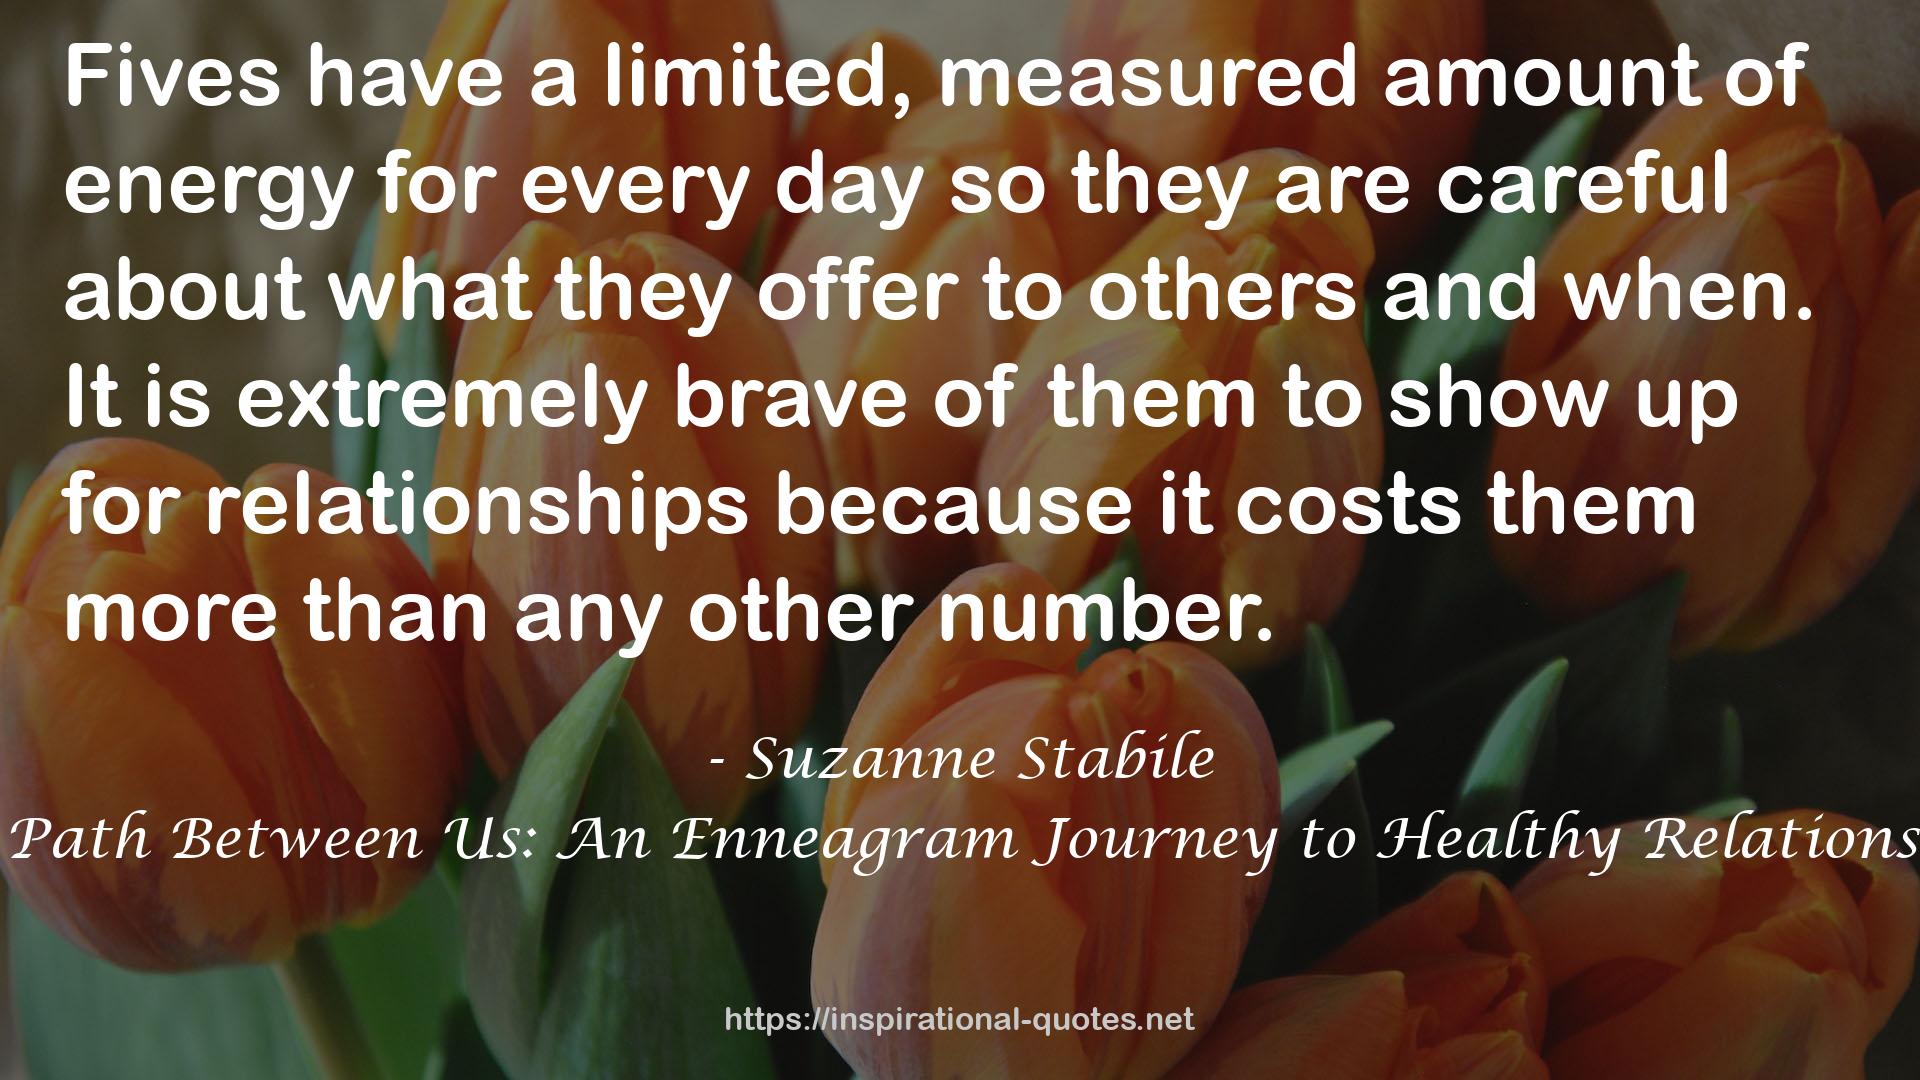 The Path Between Us: An Enneagram Journey to Healthy Relationships QUOTES